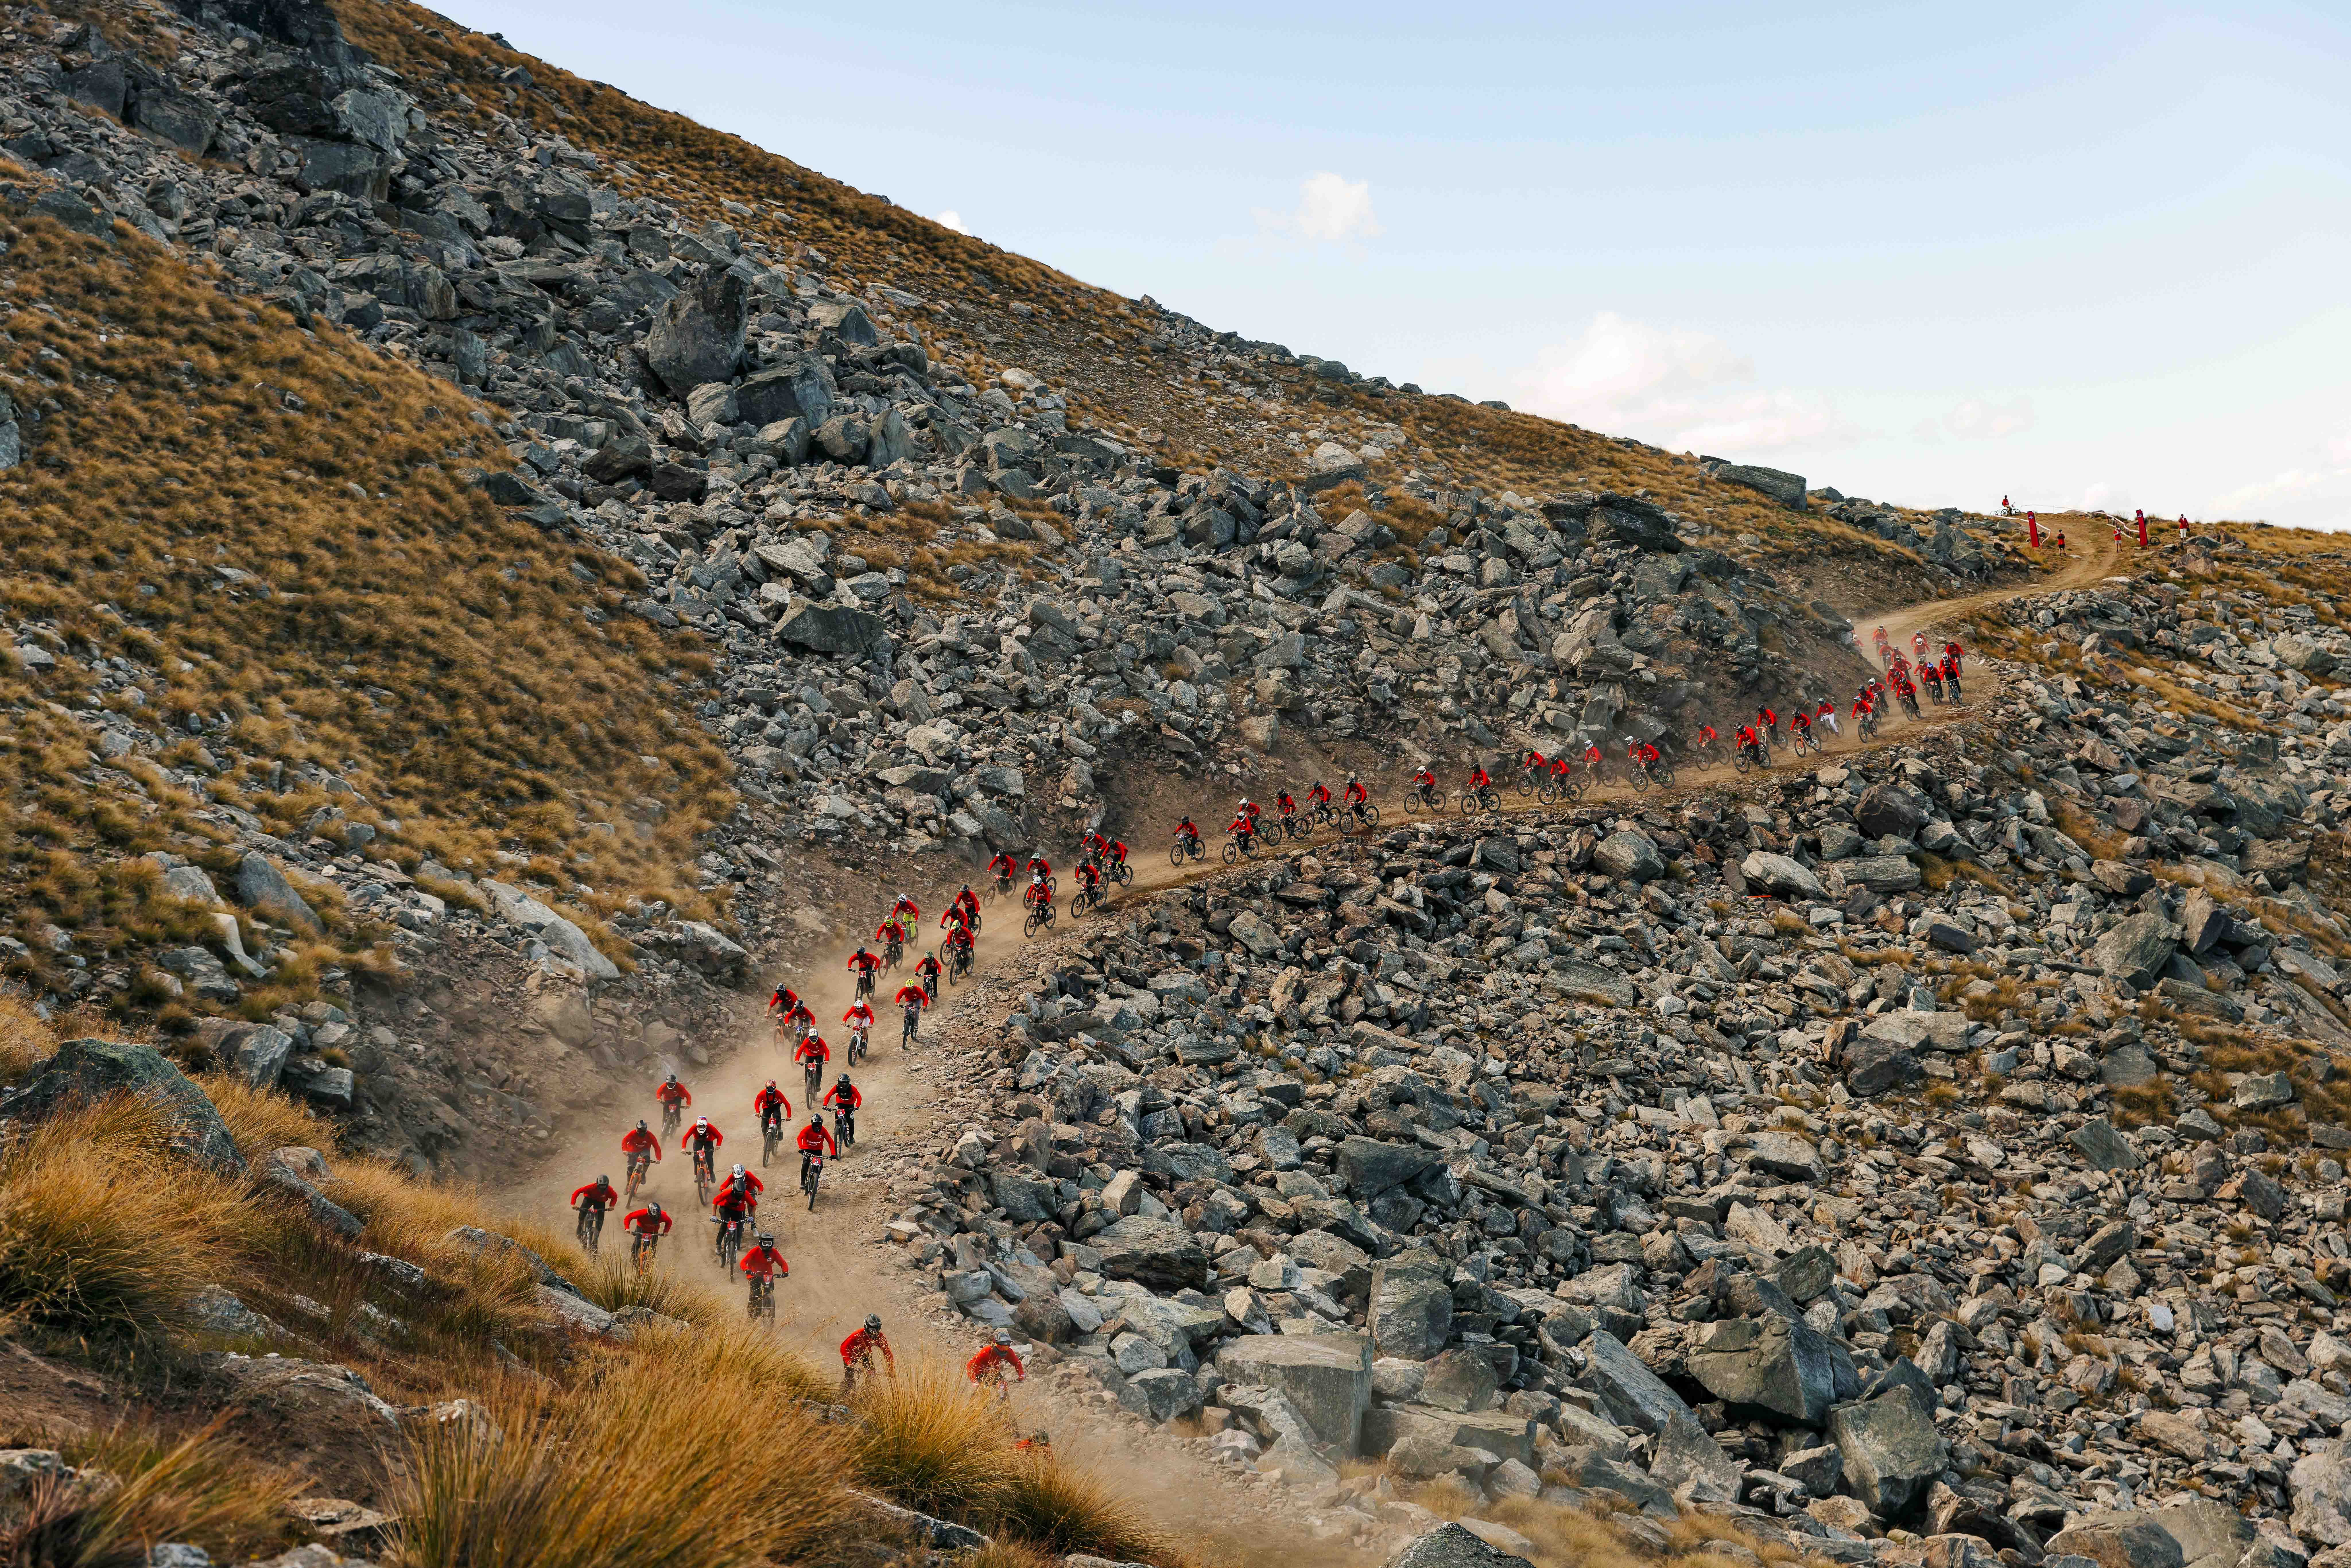 mountain bikers in red jerseys descend (en masse) down a red dusty rail, surrounded by rockfall and golden grasses, in the Cardrona Fox Hunt event